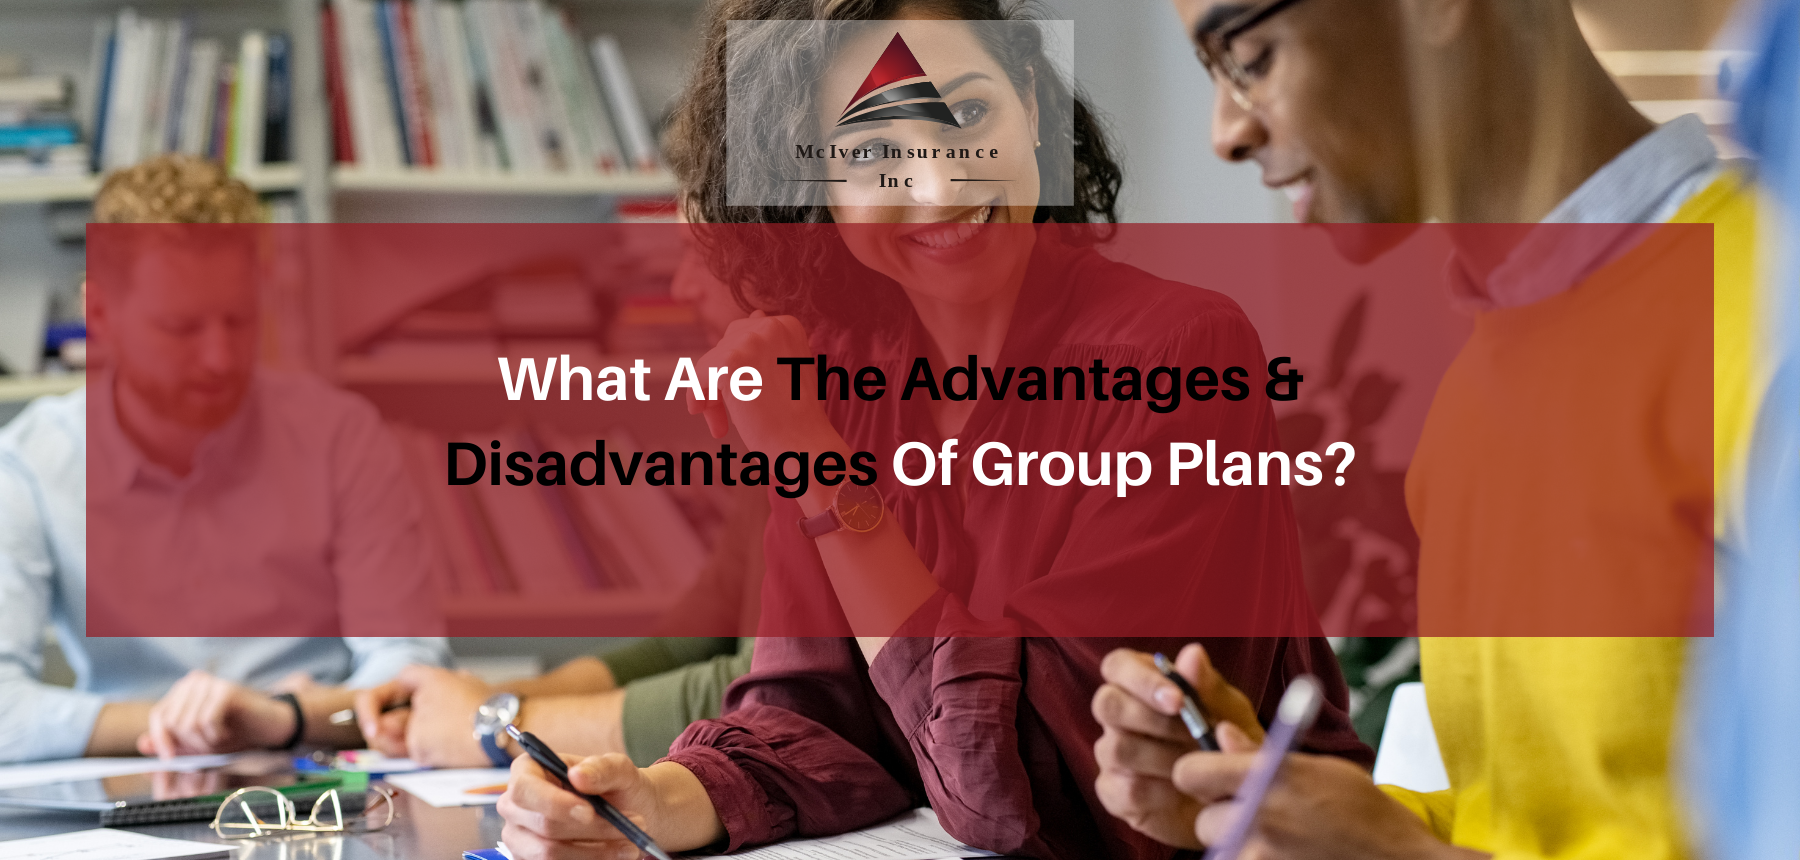 What Are The Advantages & Disadvantages Of Group Plans